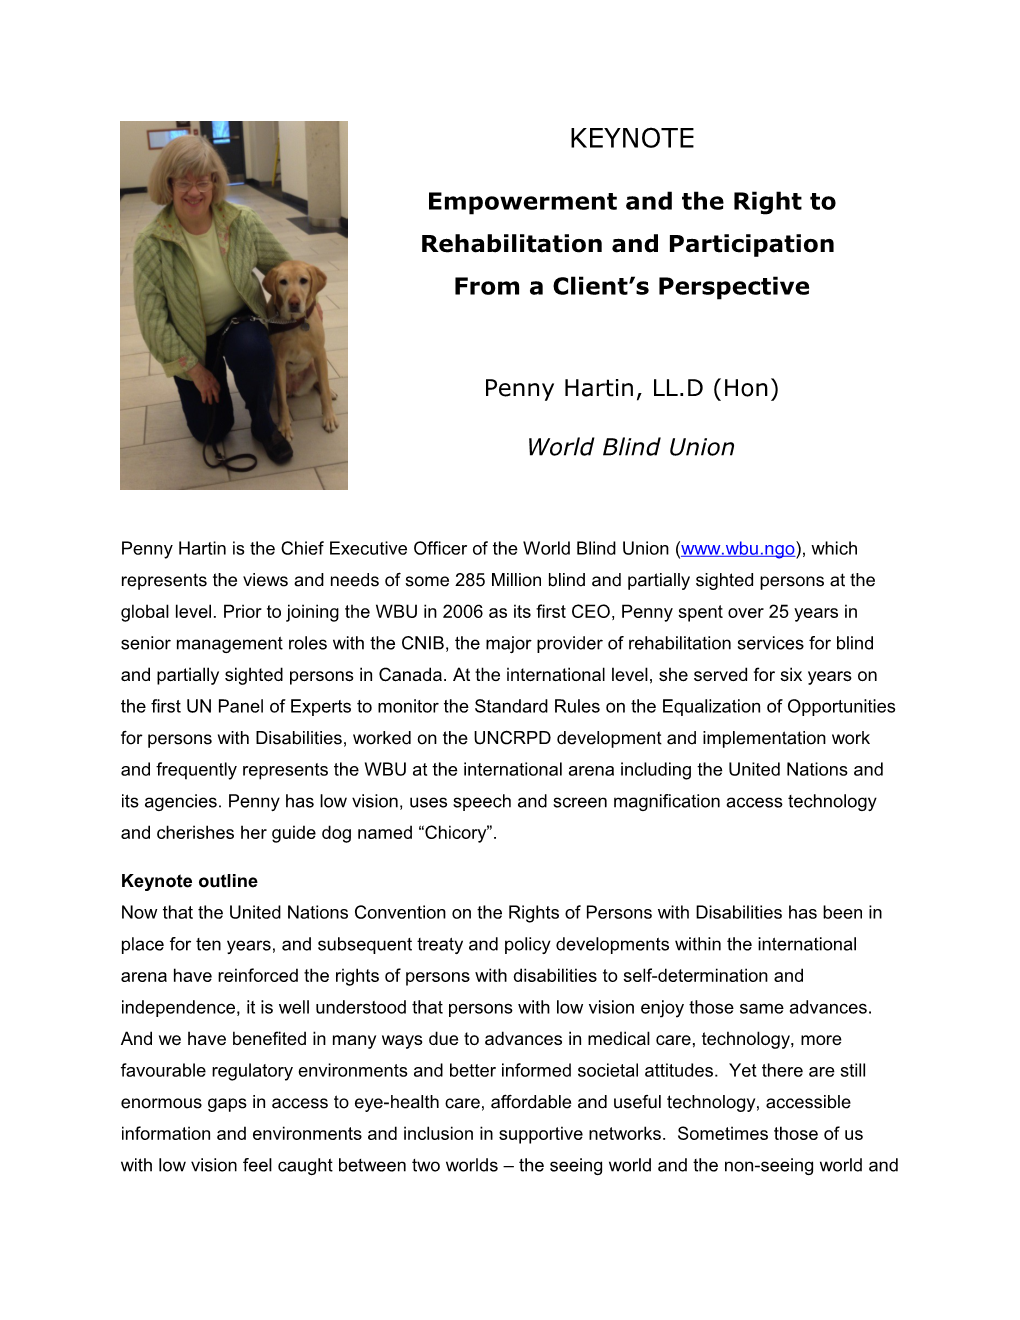 Empowerment and the Right to Rehabilitation and Participation